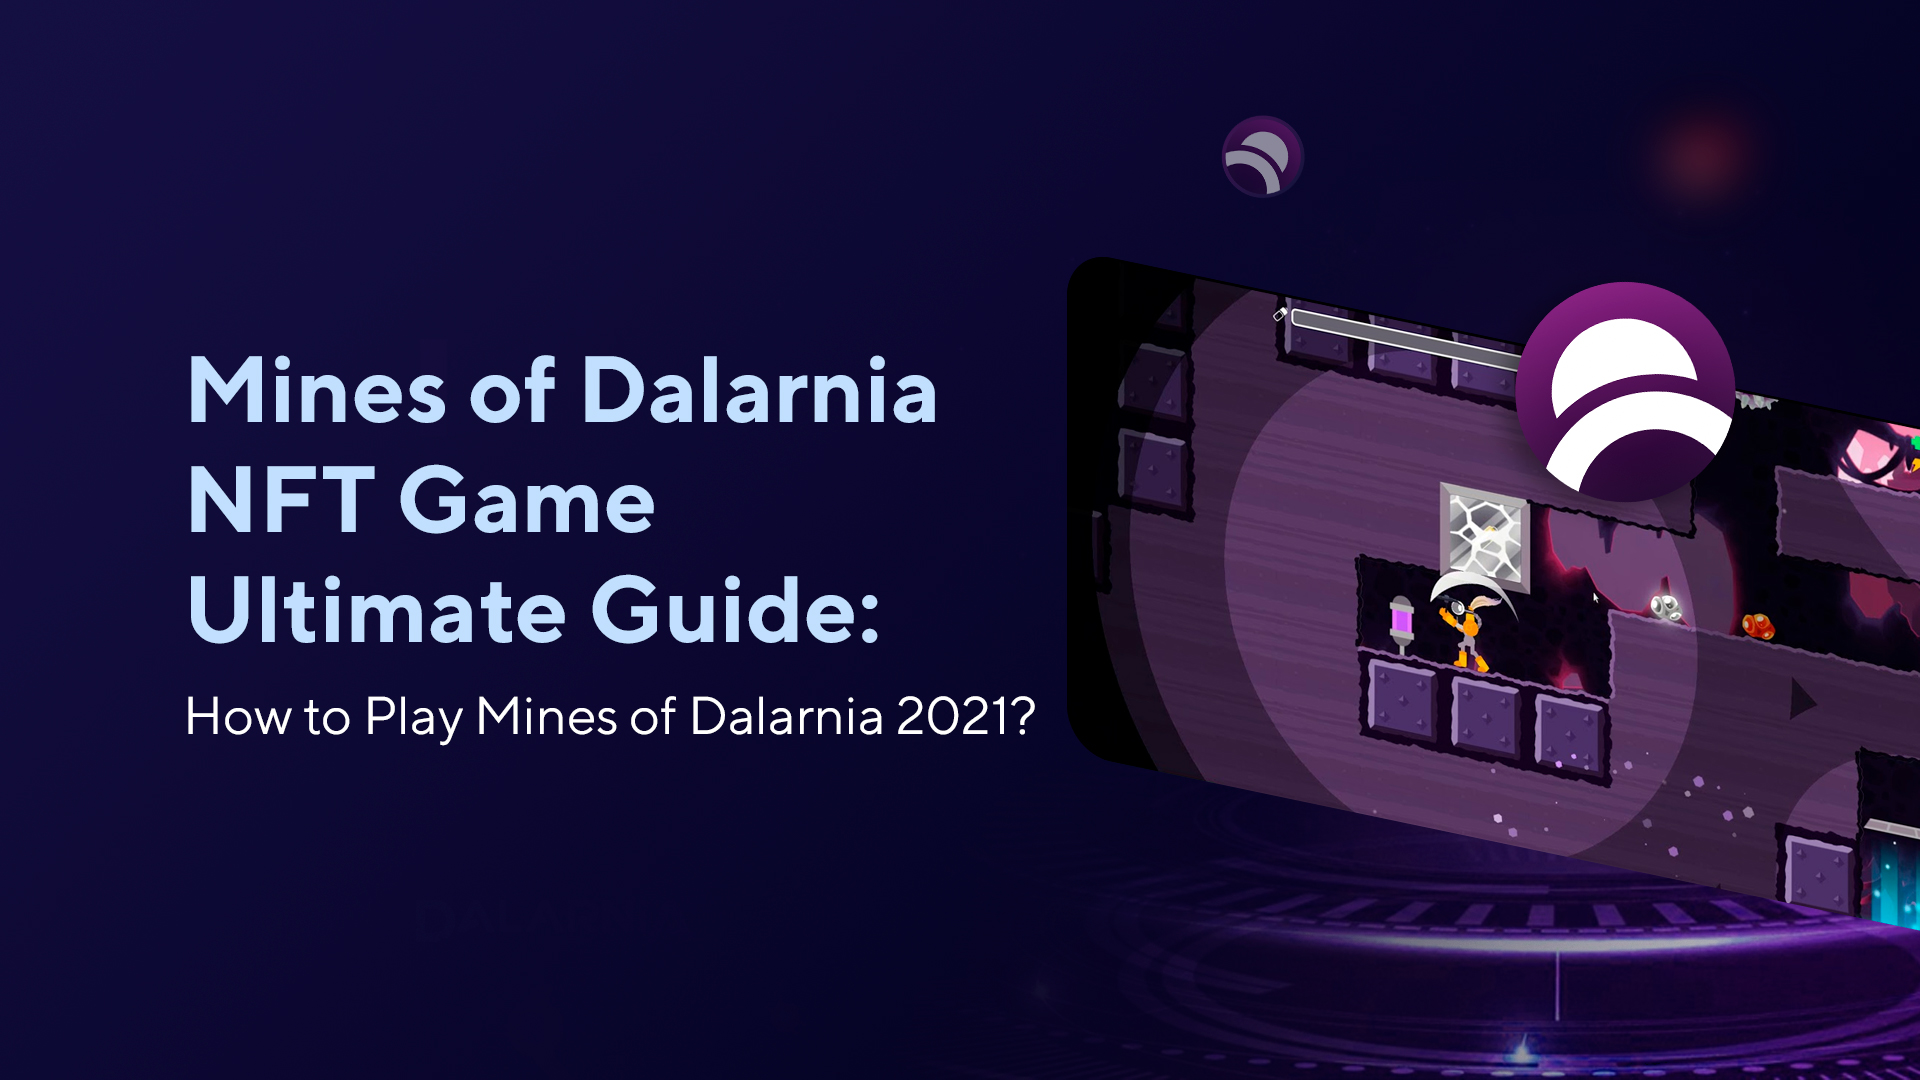 Mines of Dalarnia NFT Game Ultimate Guide: How to Play Mines of Dalarnia 2021?